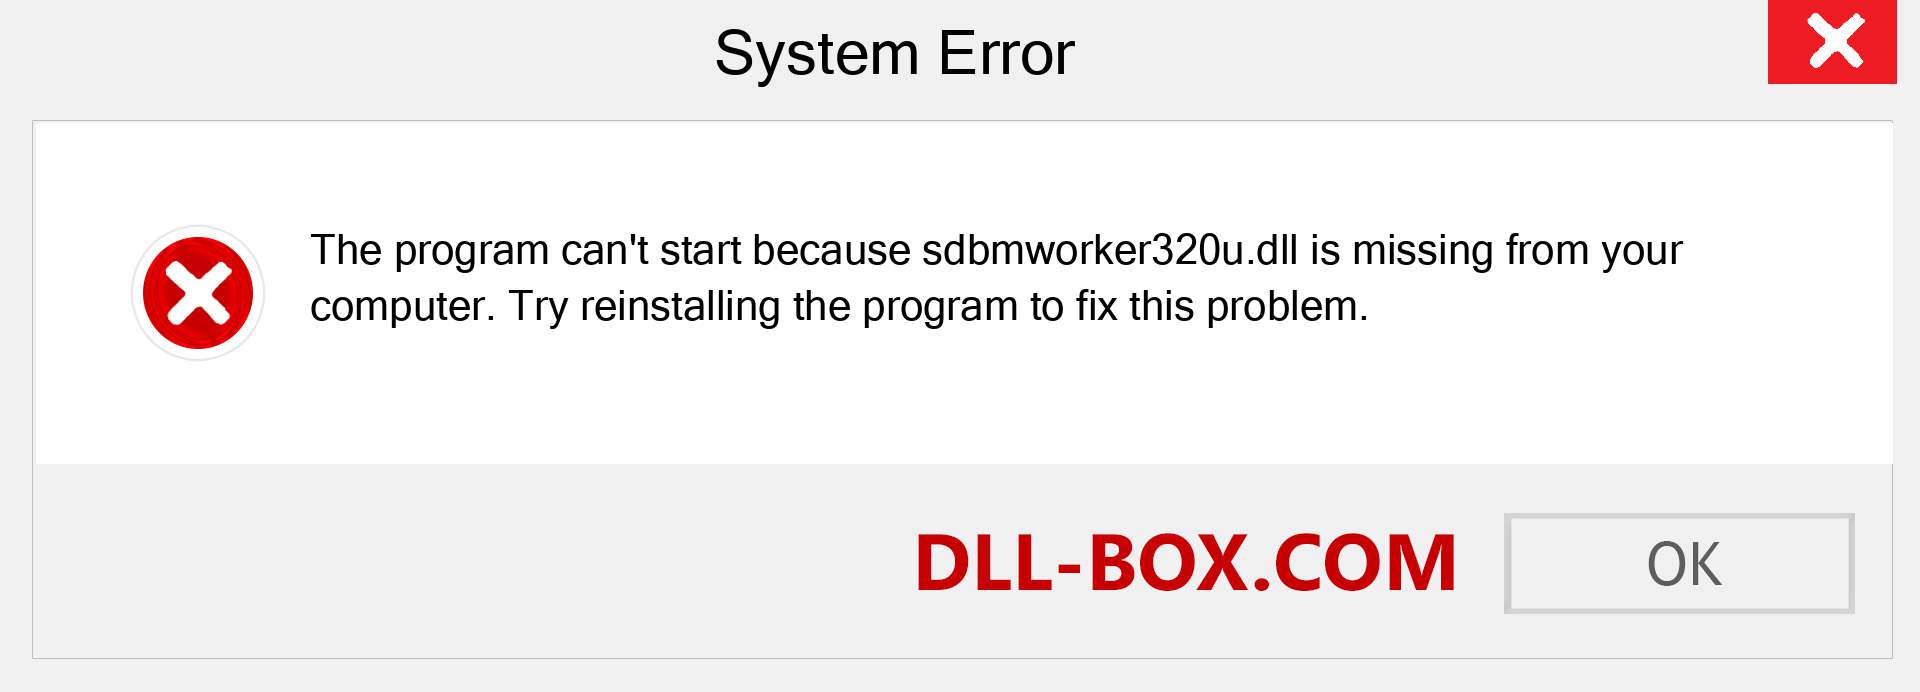  sdbmworker320u.dll file is missing?. Download for Windows 7, 8, 10 - Fix  sdbmworker320u dll Missing Error on Windows, photos, images